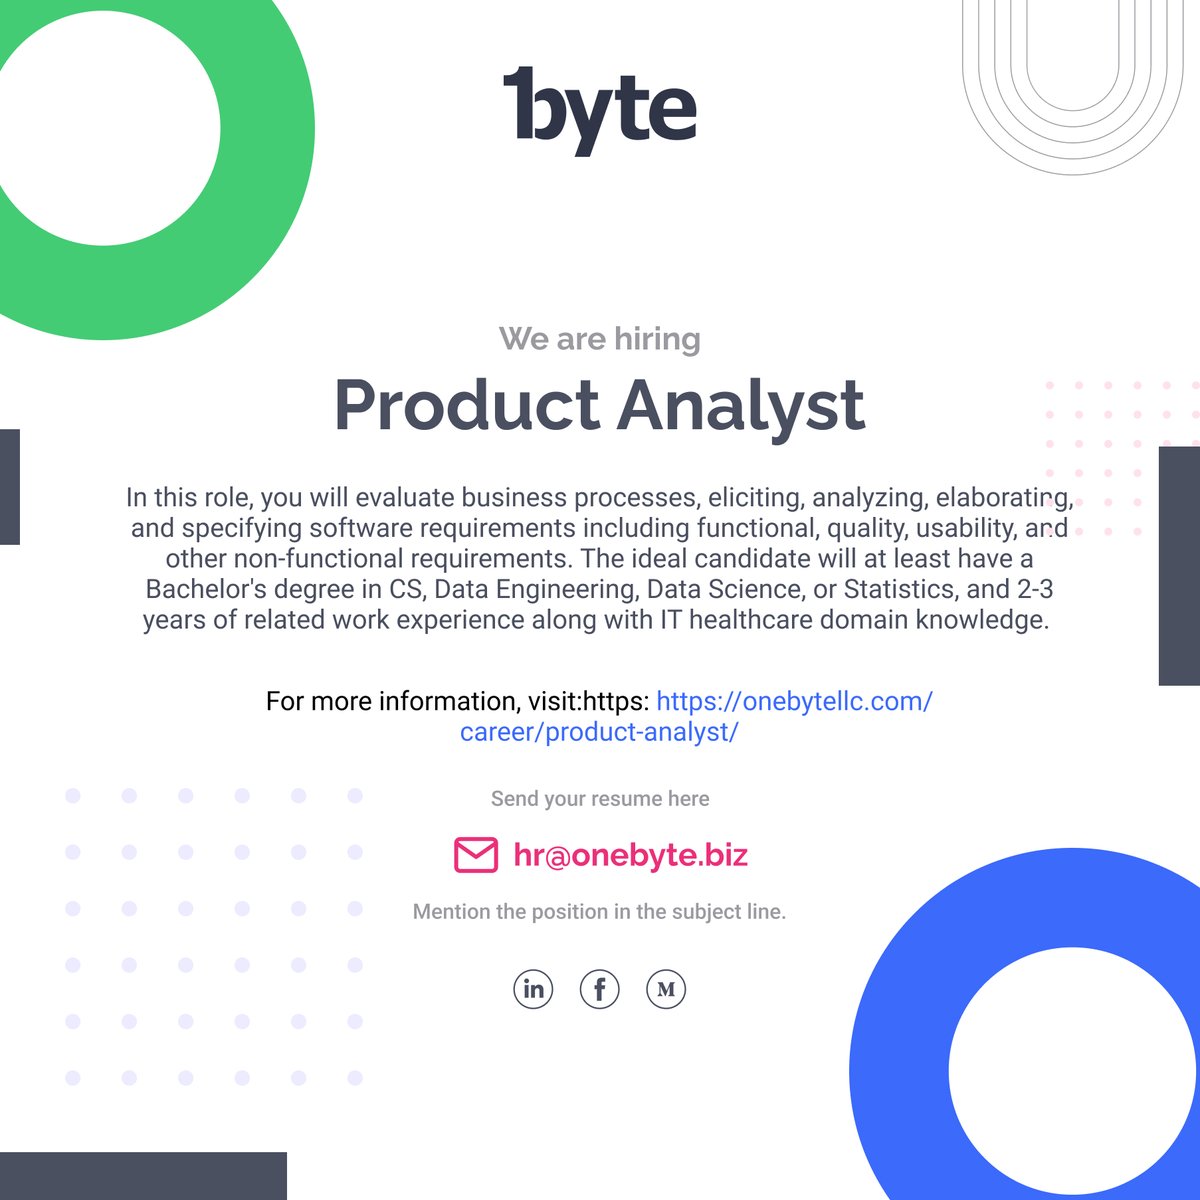 We're looking to grow our team, and YOU are who we need! Apply now on our website.

onebytellc.com/career/product…

#recruitment #hiring #jobs #jobsearch #network #product #productanalyst #engineering #excitingopportunity #onebyte